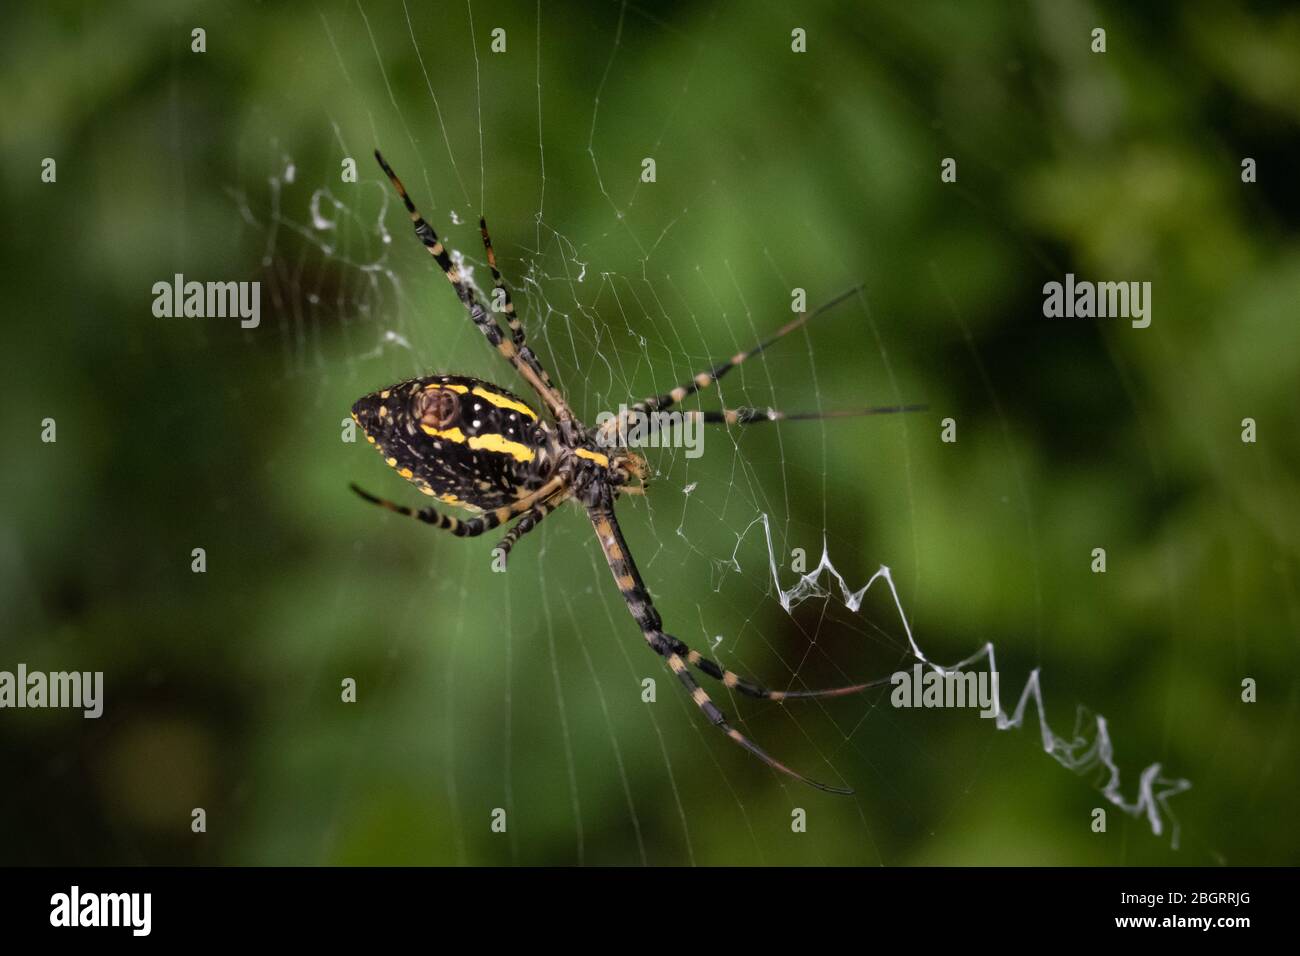 An orb-weaver spider moves across its silken trap against a blurred green background Stock Photo